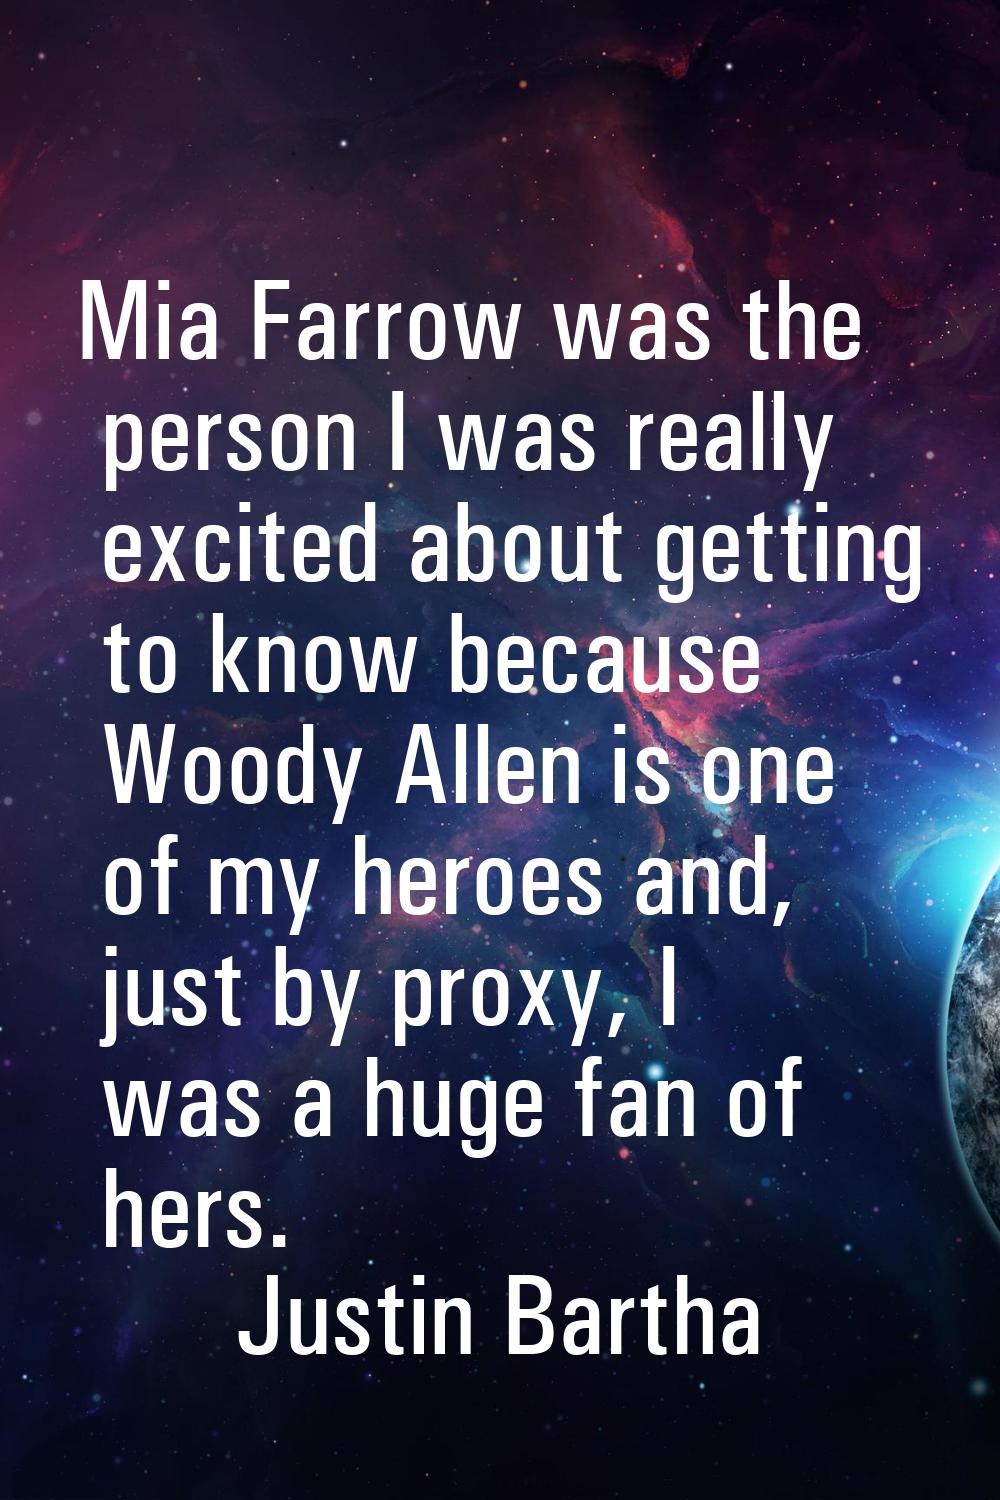 Mia Farrow was the person I was really excited about getting to know because Woody Allen is one of 